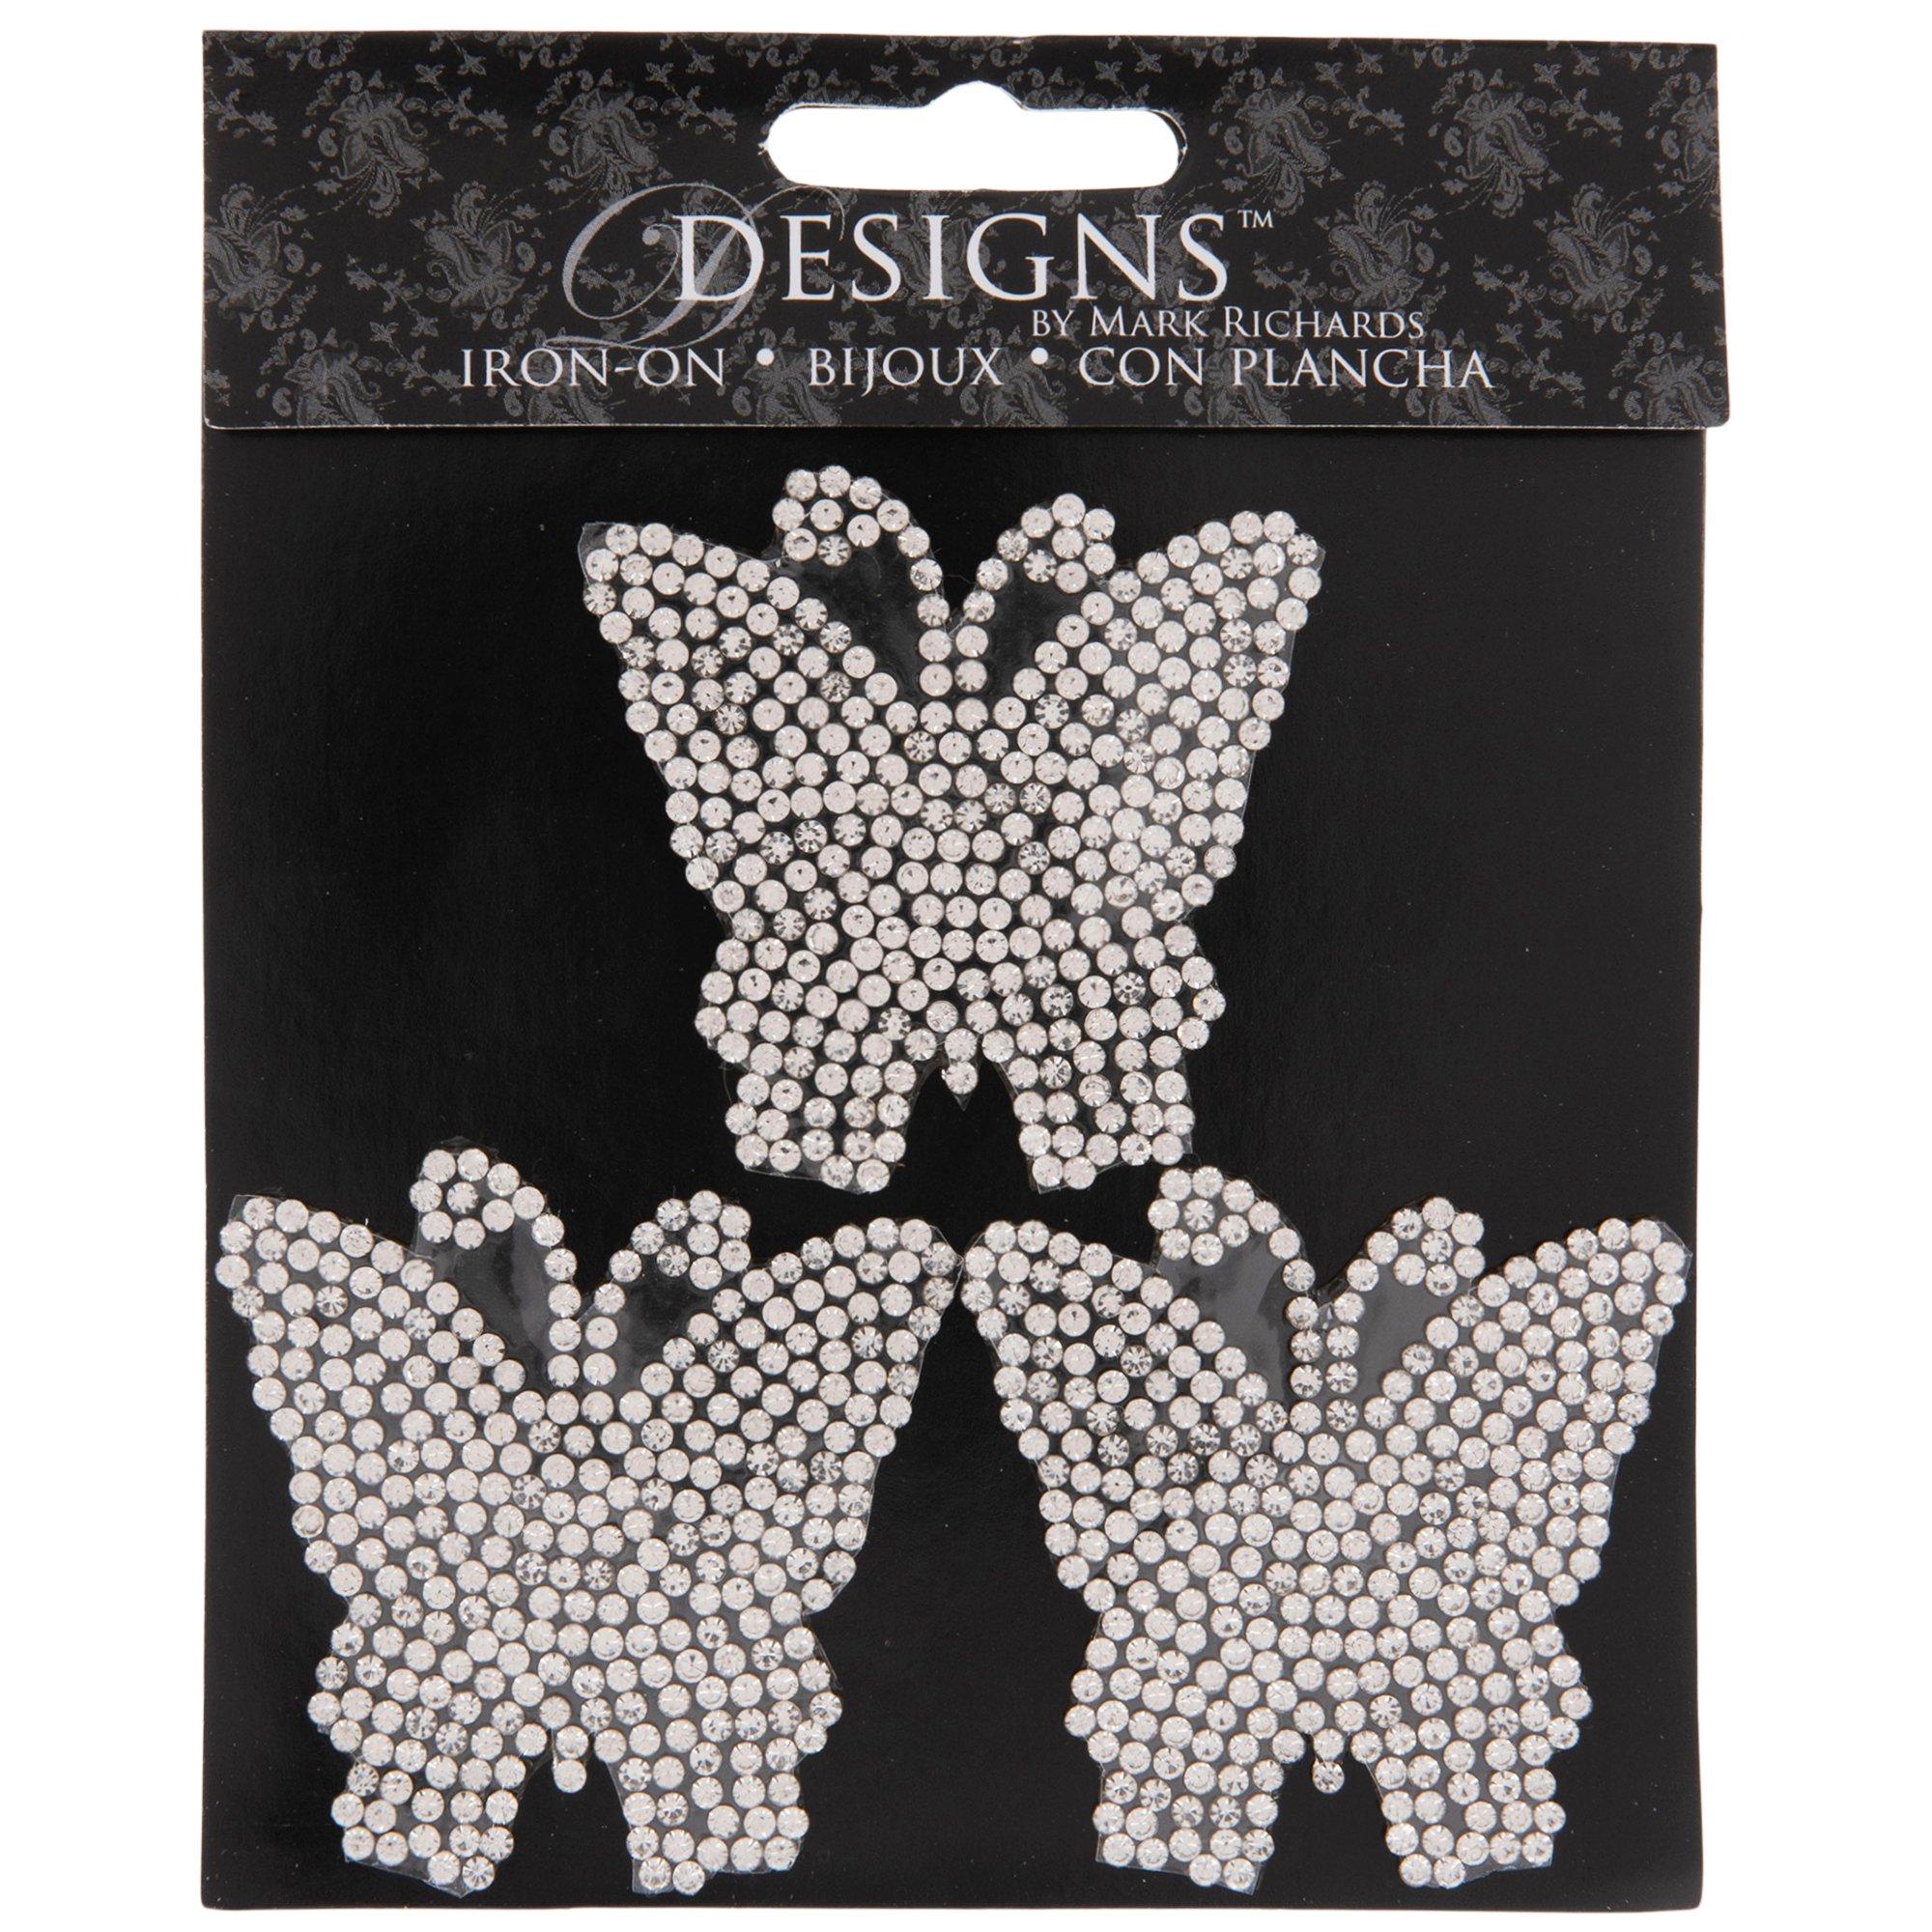 Blue Butterfly Iron-On Patch, Hobby Lobby